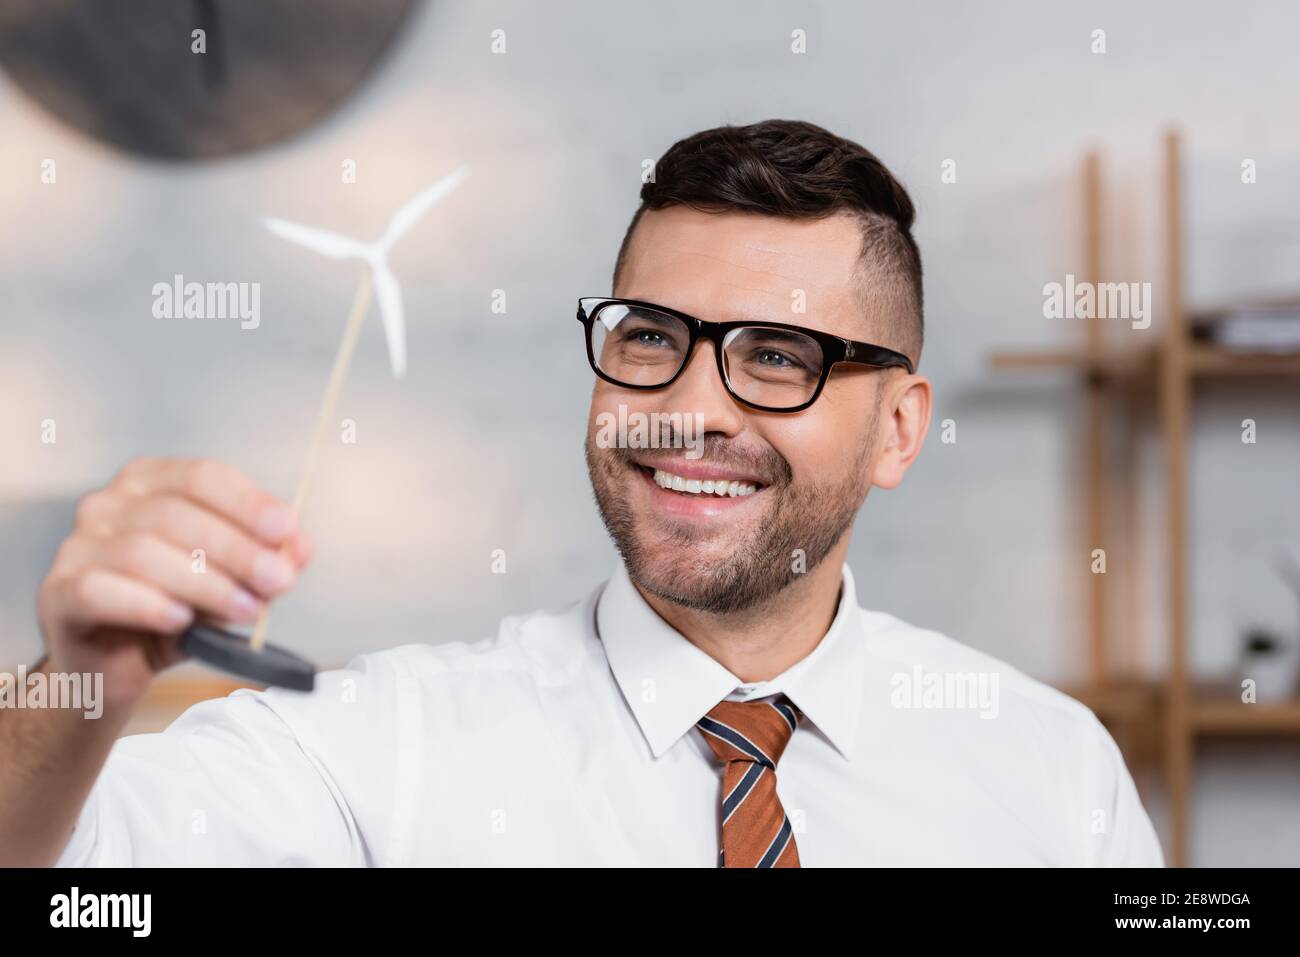 cheerful architect in eyeglasses smiling while holding model of wind turbine Stock Photo